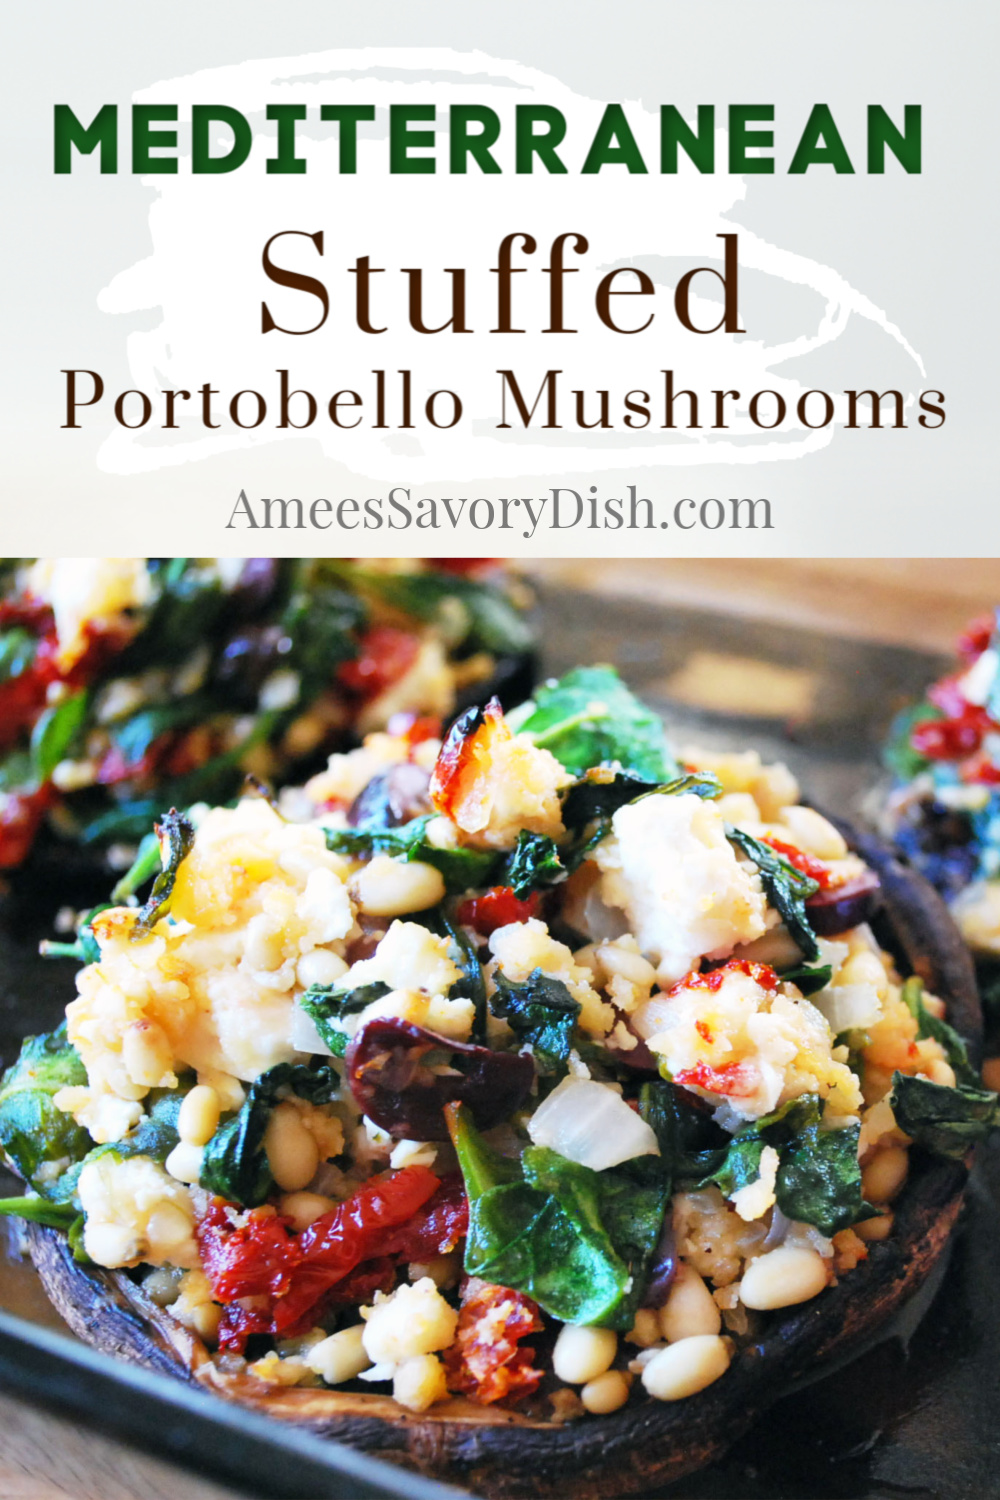 Mediterranean stuffed portabello mushrooms are a simple side dish or meatless main dish.  Plump portabello mushrooms are stuffed with sun-dried tomatoes, baby spinach, pine nuts, Kalamata olives, gluten-free breadcrumbs, feta cheese, and spices.  Easy and delicious! #stuffedmushrooms #stuffedportobello #vegetarianrecipe #mushrooms via @Ameessavorydish